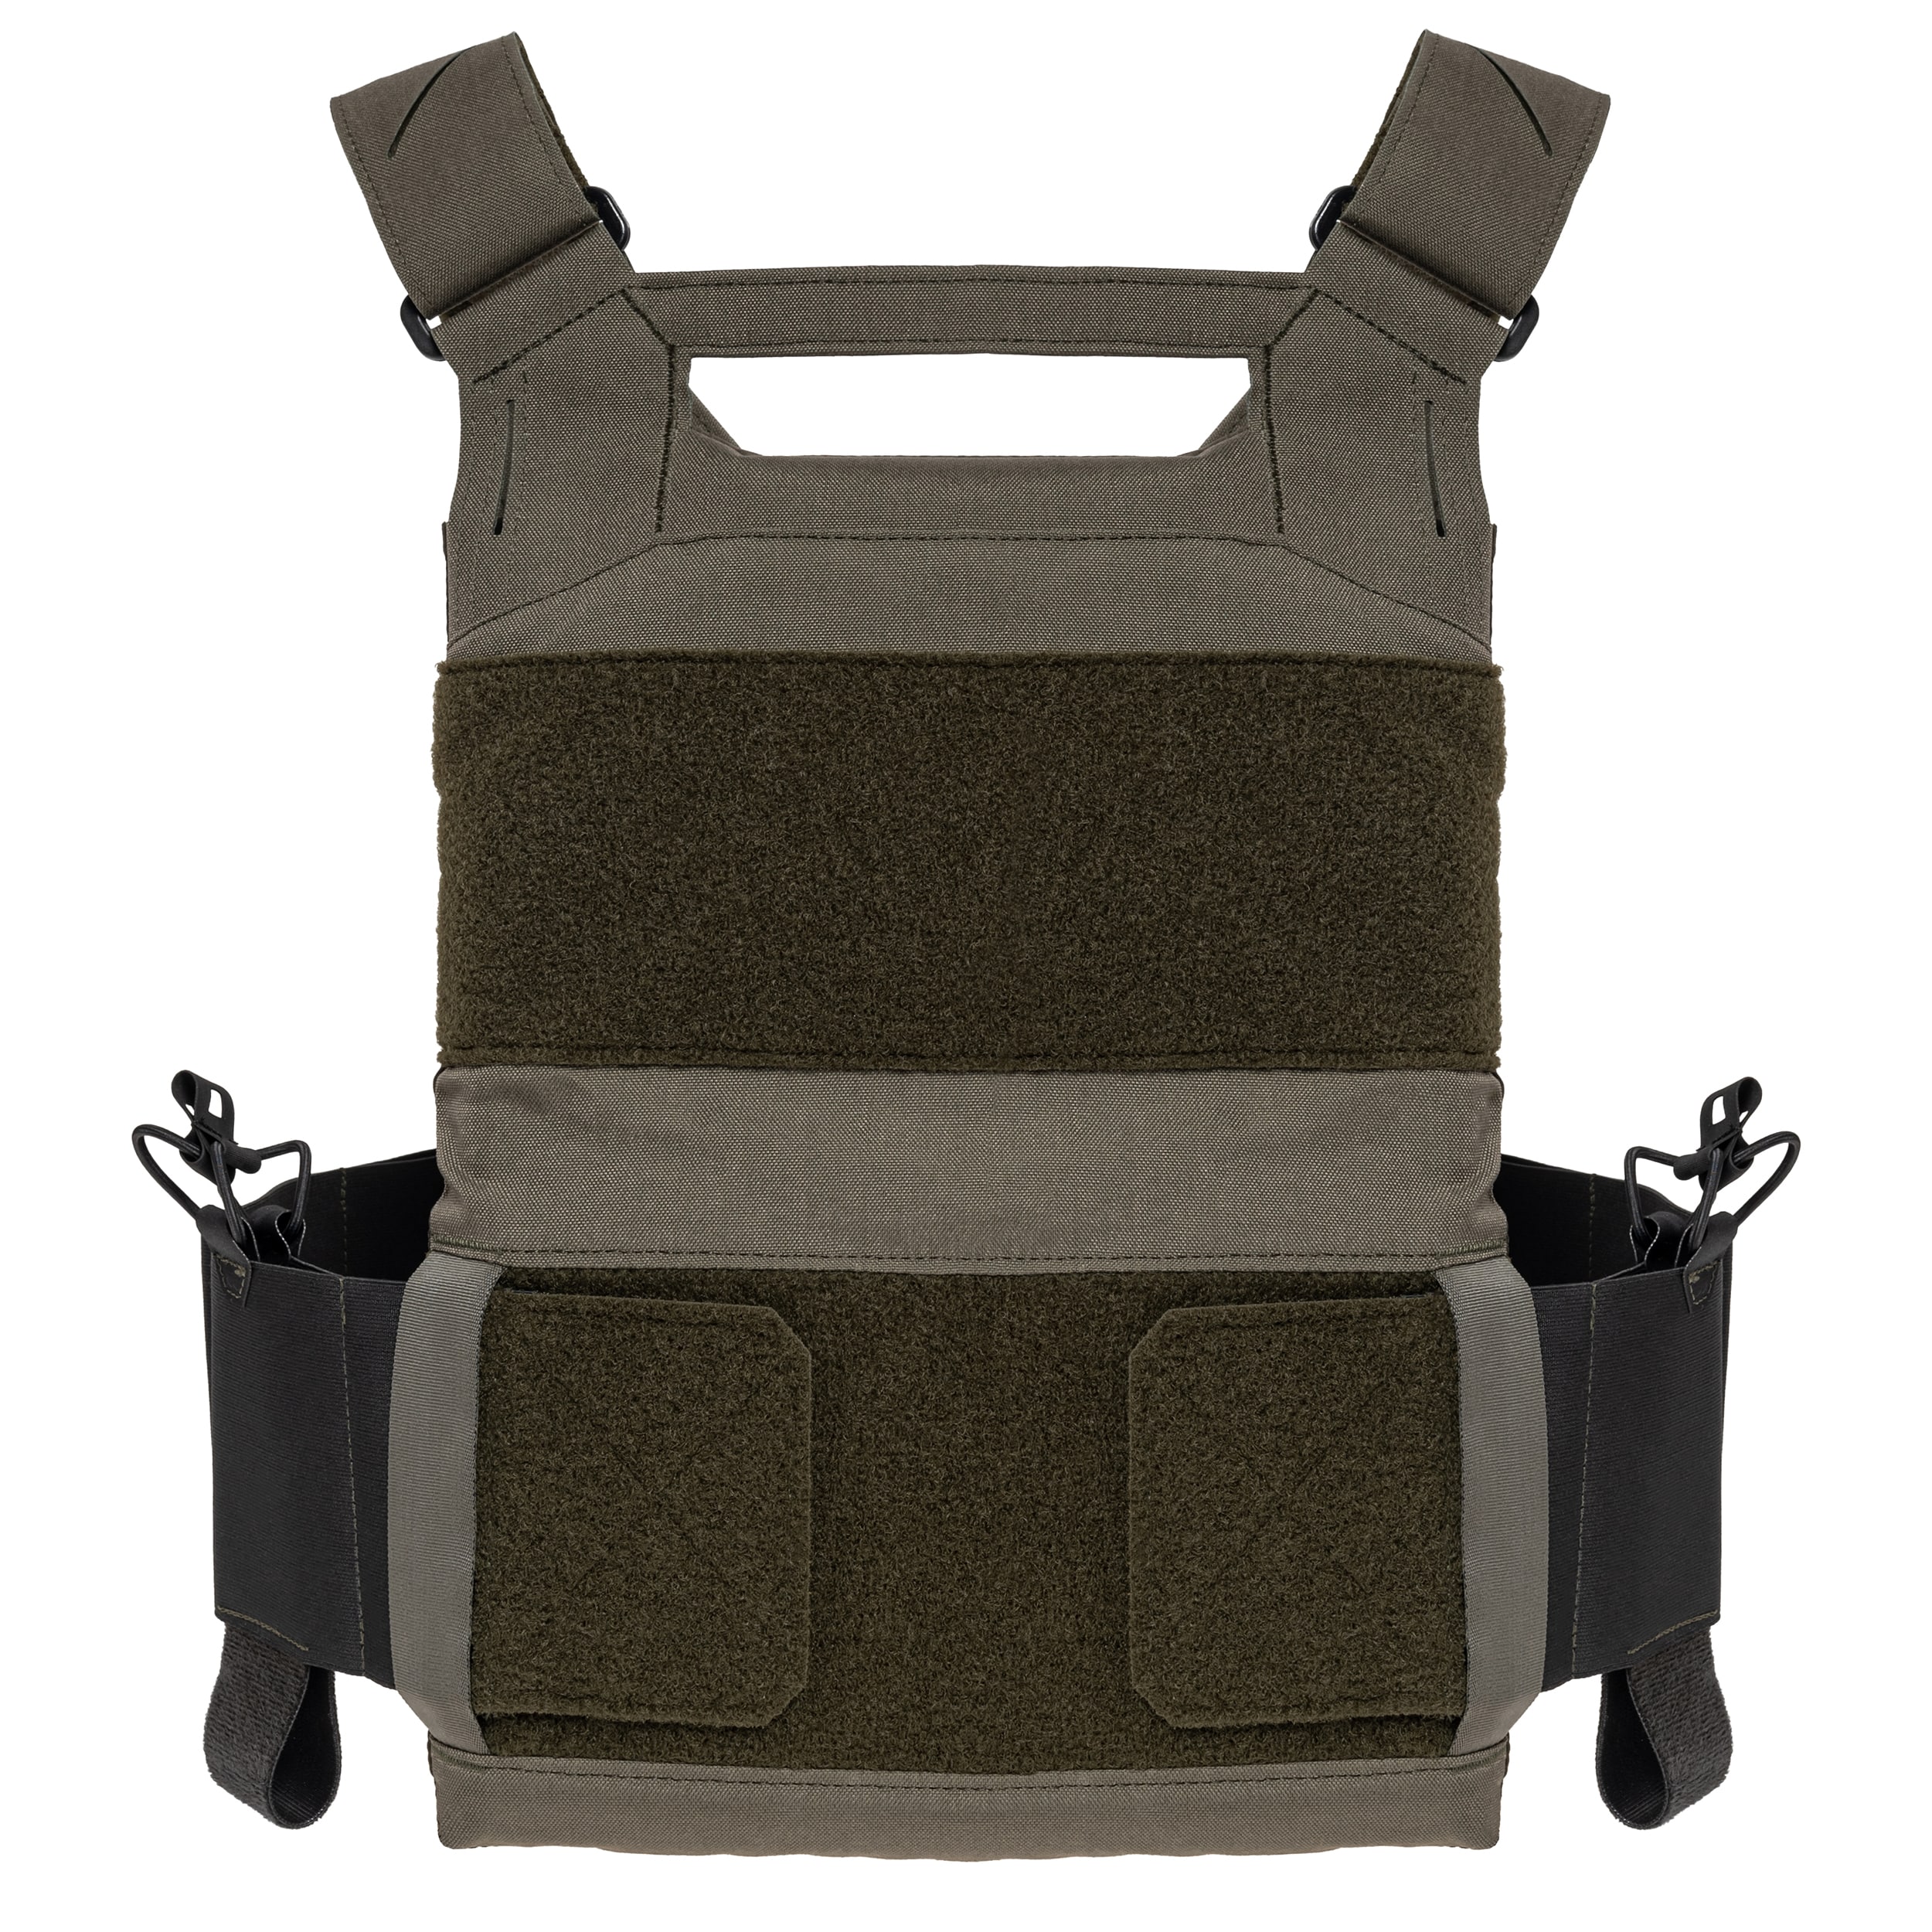 Плитоноска Direct Action Hellcat Low Vis Plate Carrier - Ranger Green